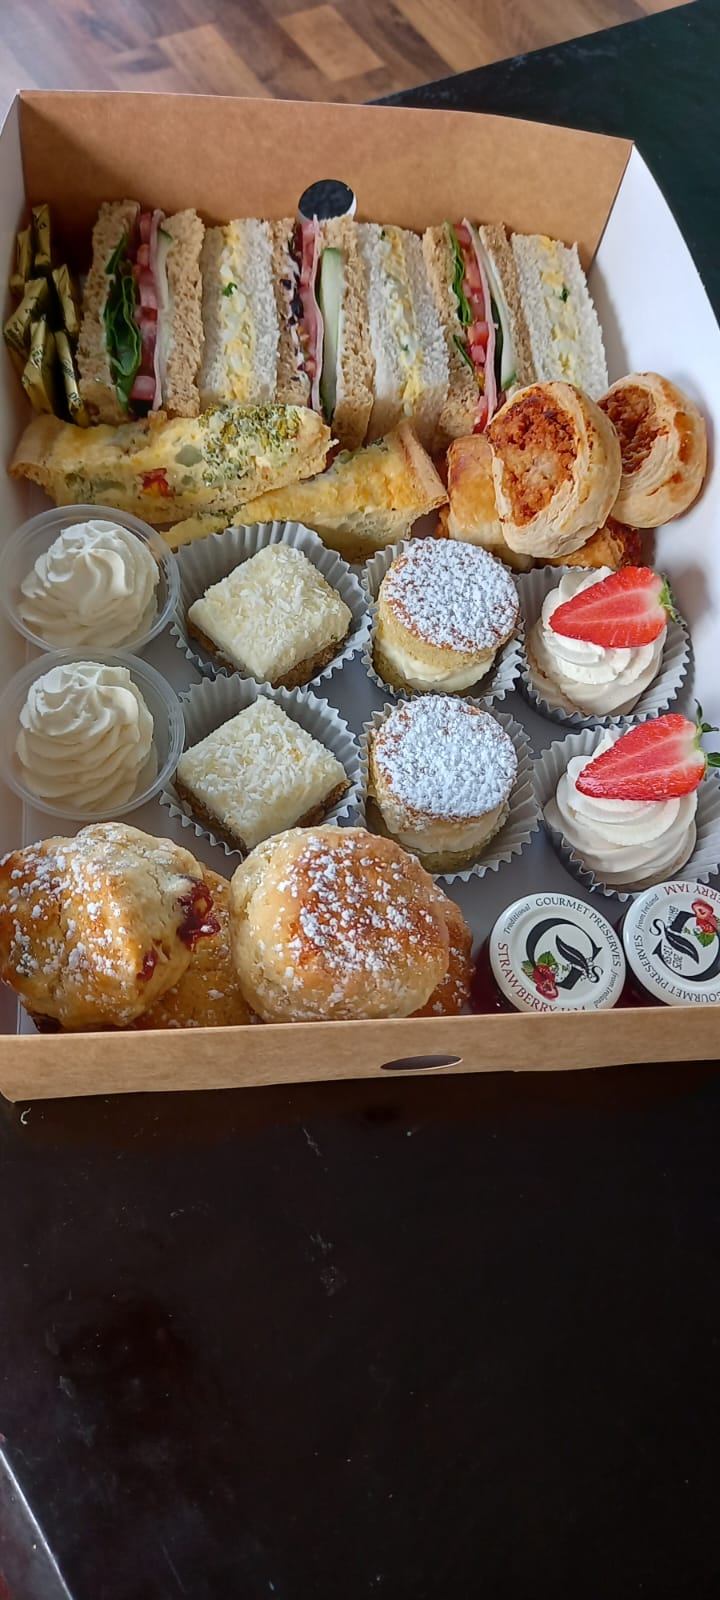 Takeaway Traditional Afternoon Tea for 2